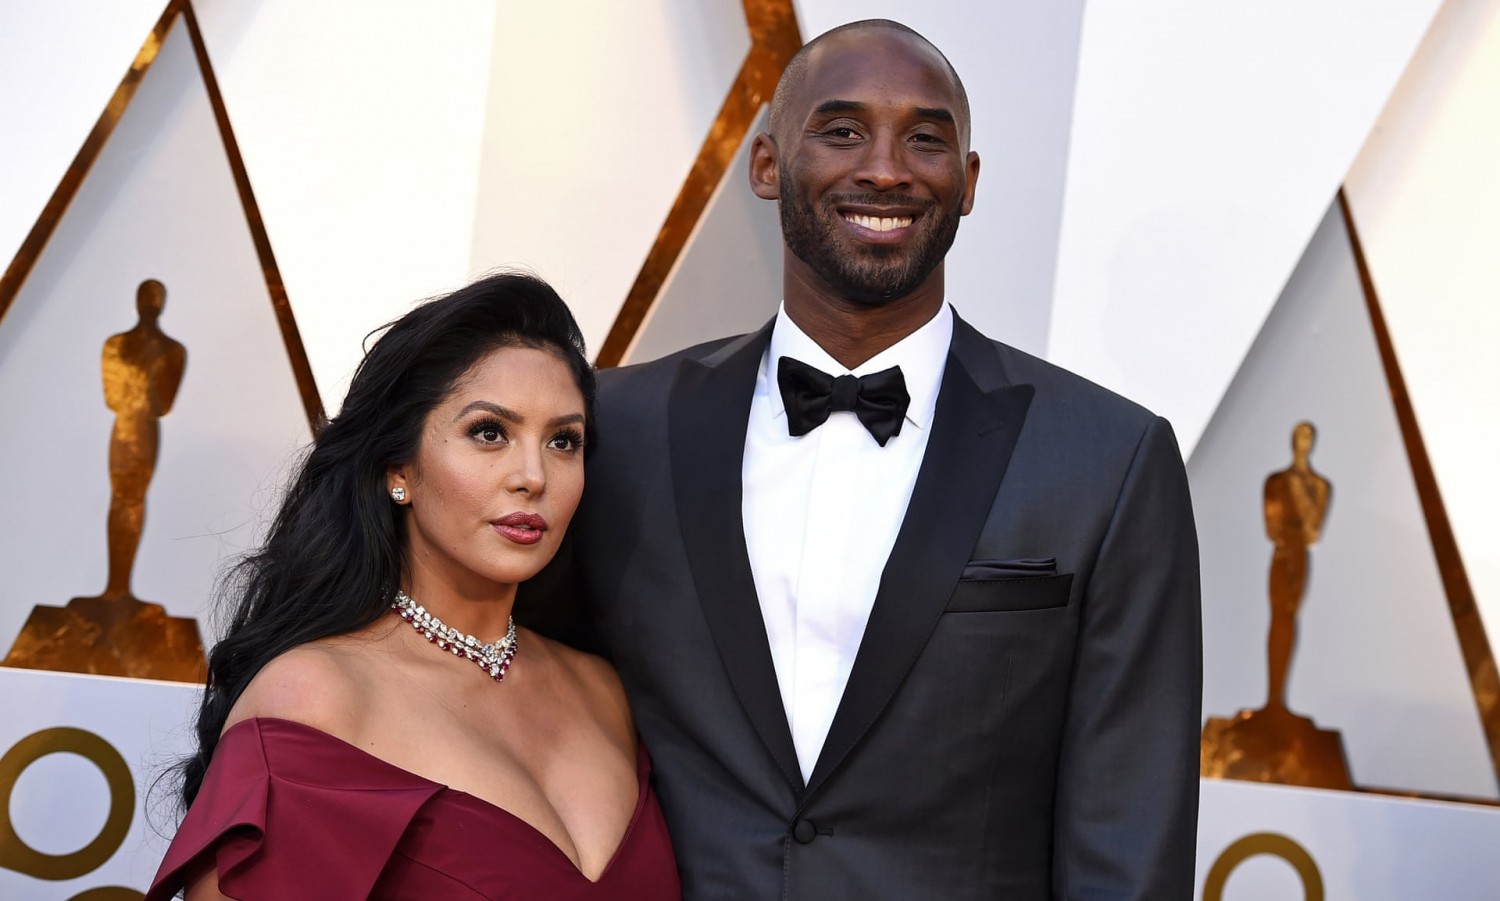 Kobe and Vanessa Bryant at the 2018 Oscars. The couple had four children together. Photograph: Jordan Strauss/Invision/AP